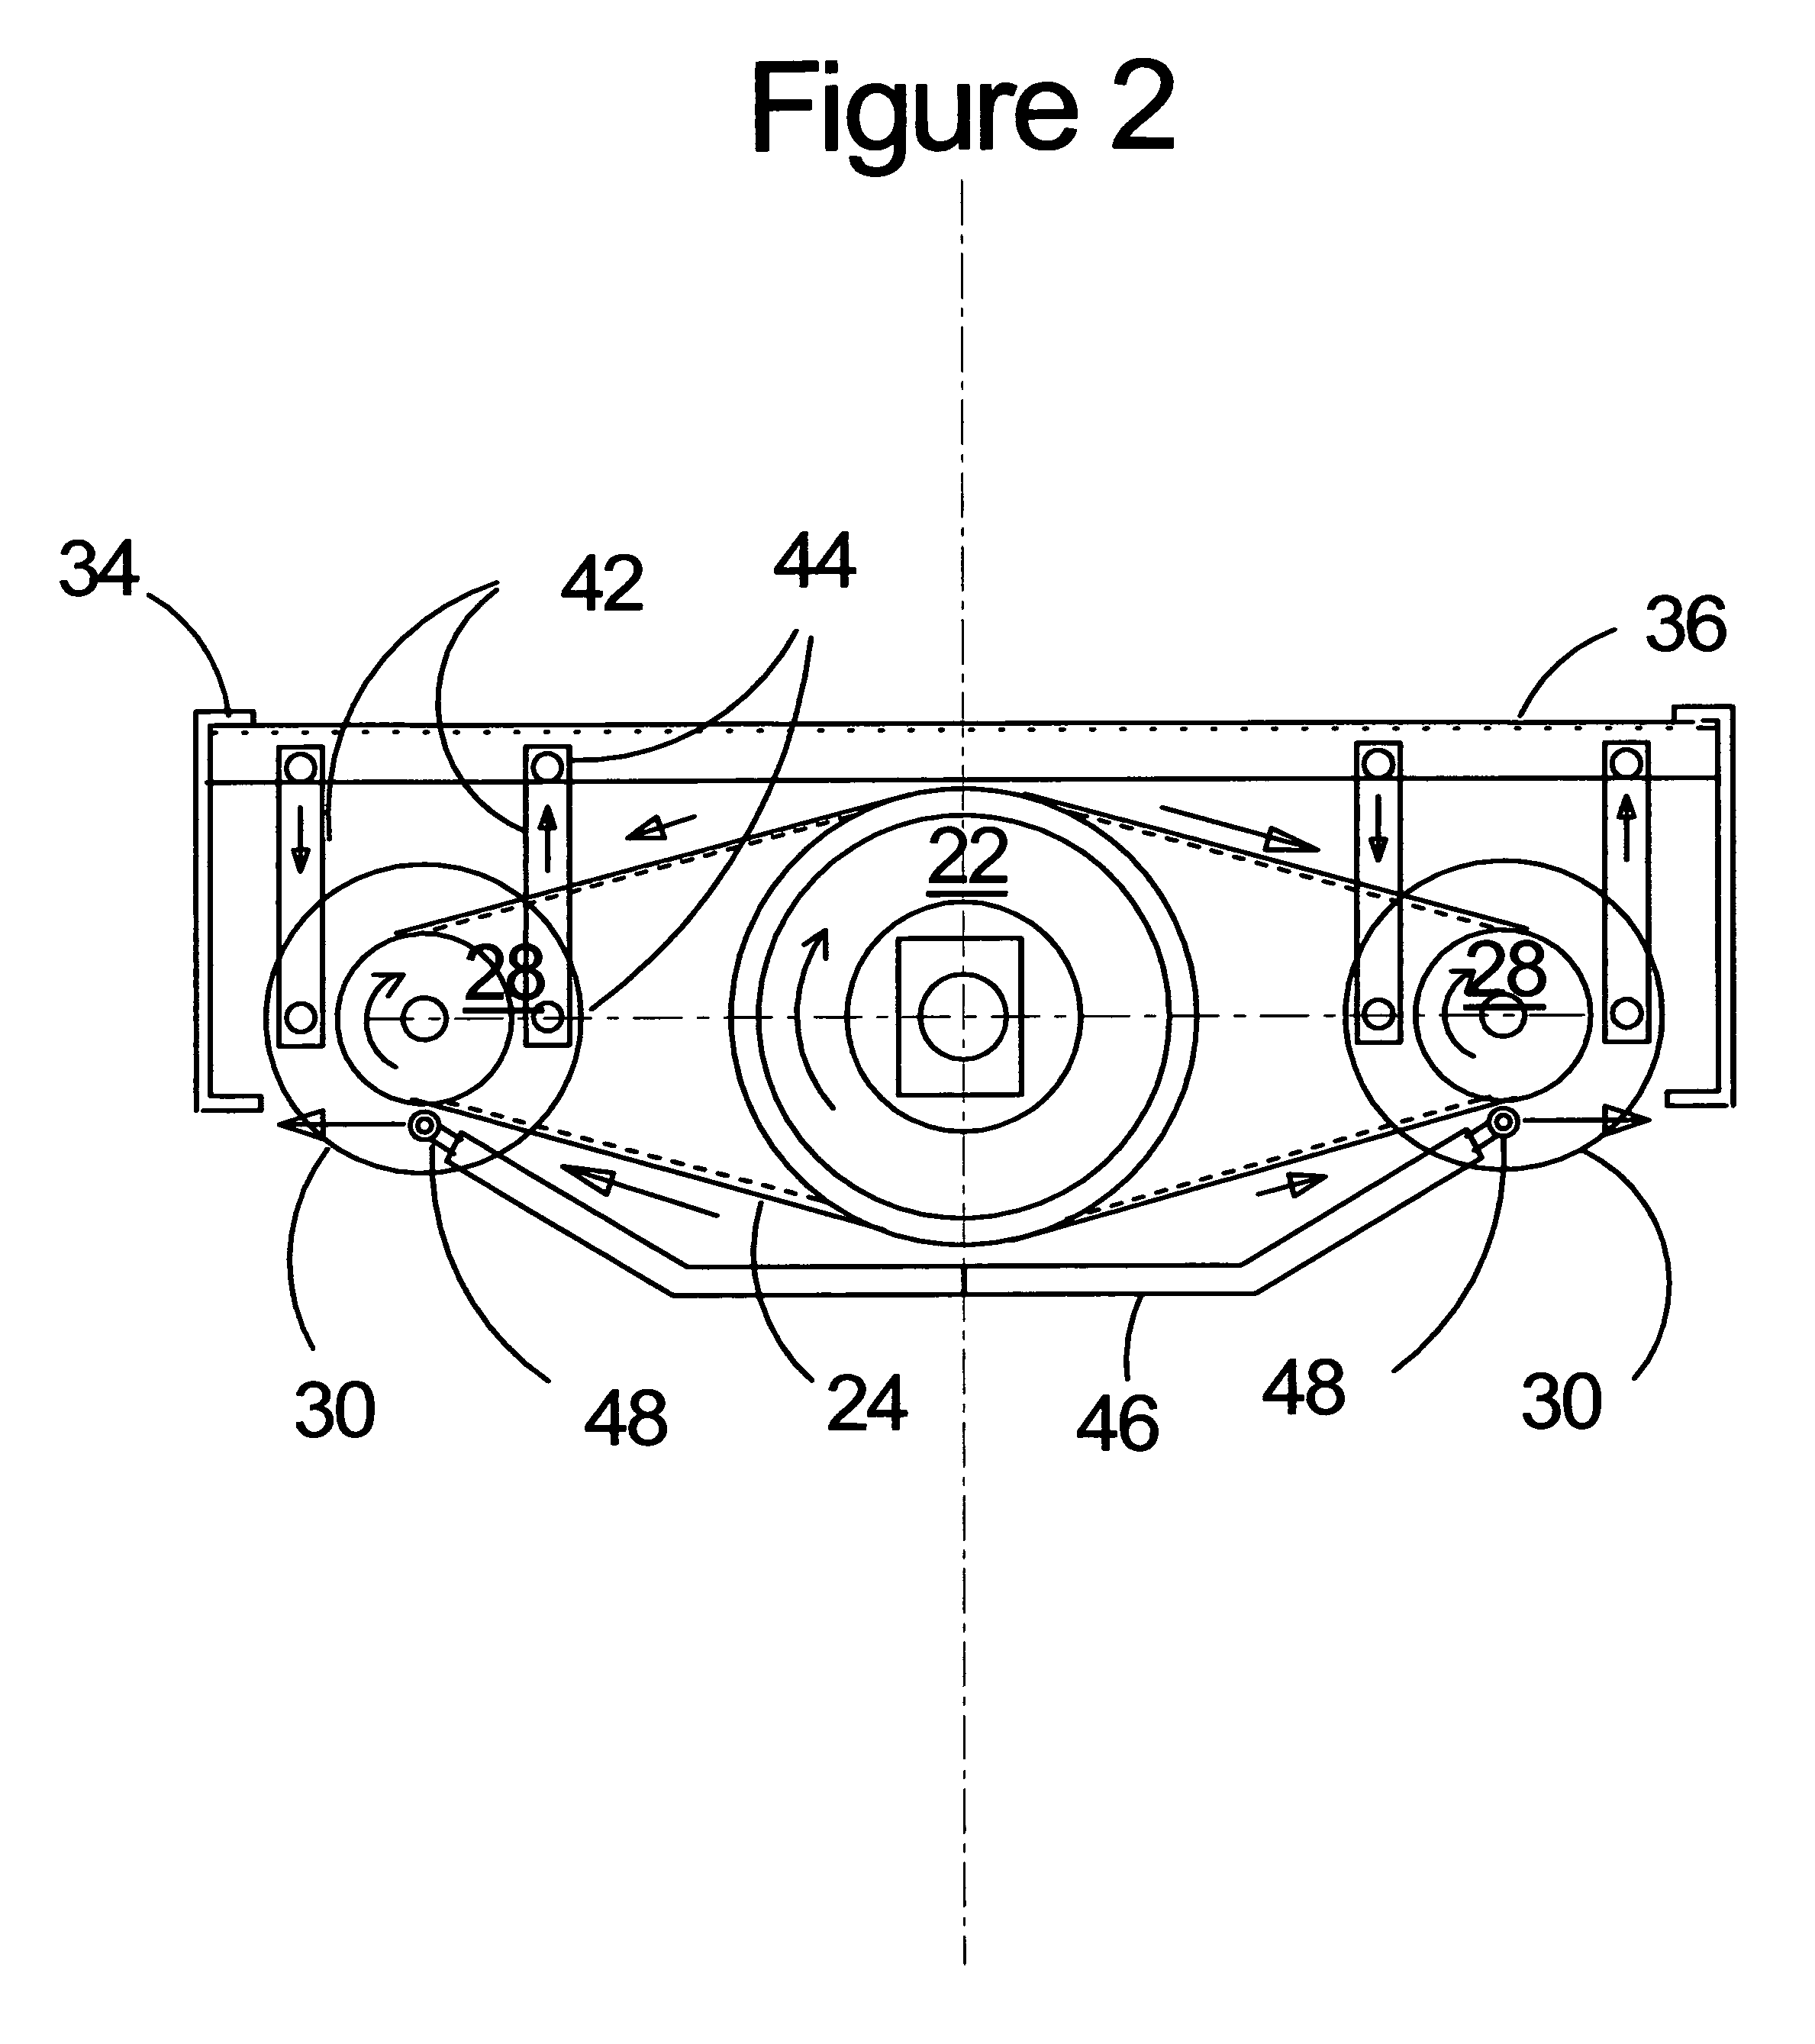 Balanced Belt or Chain Drive for Electric Hybrid Vehicle Conversion